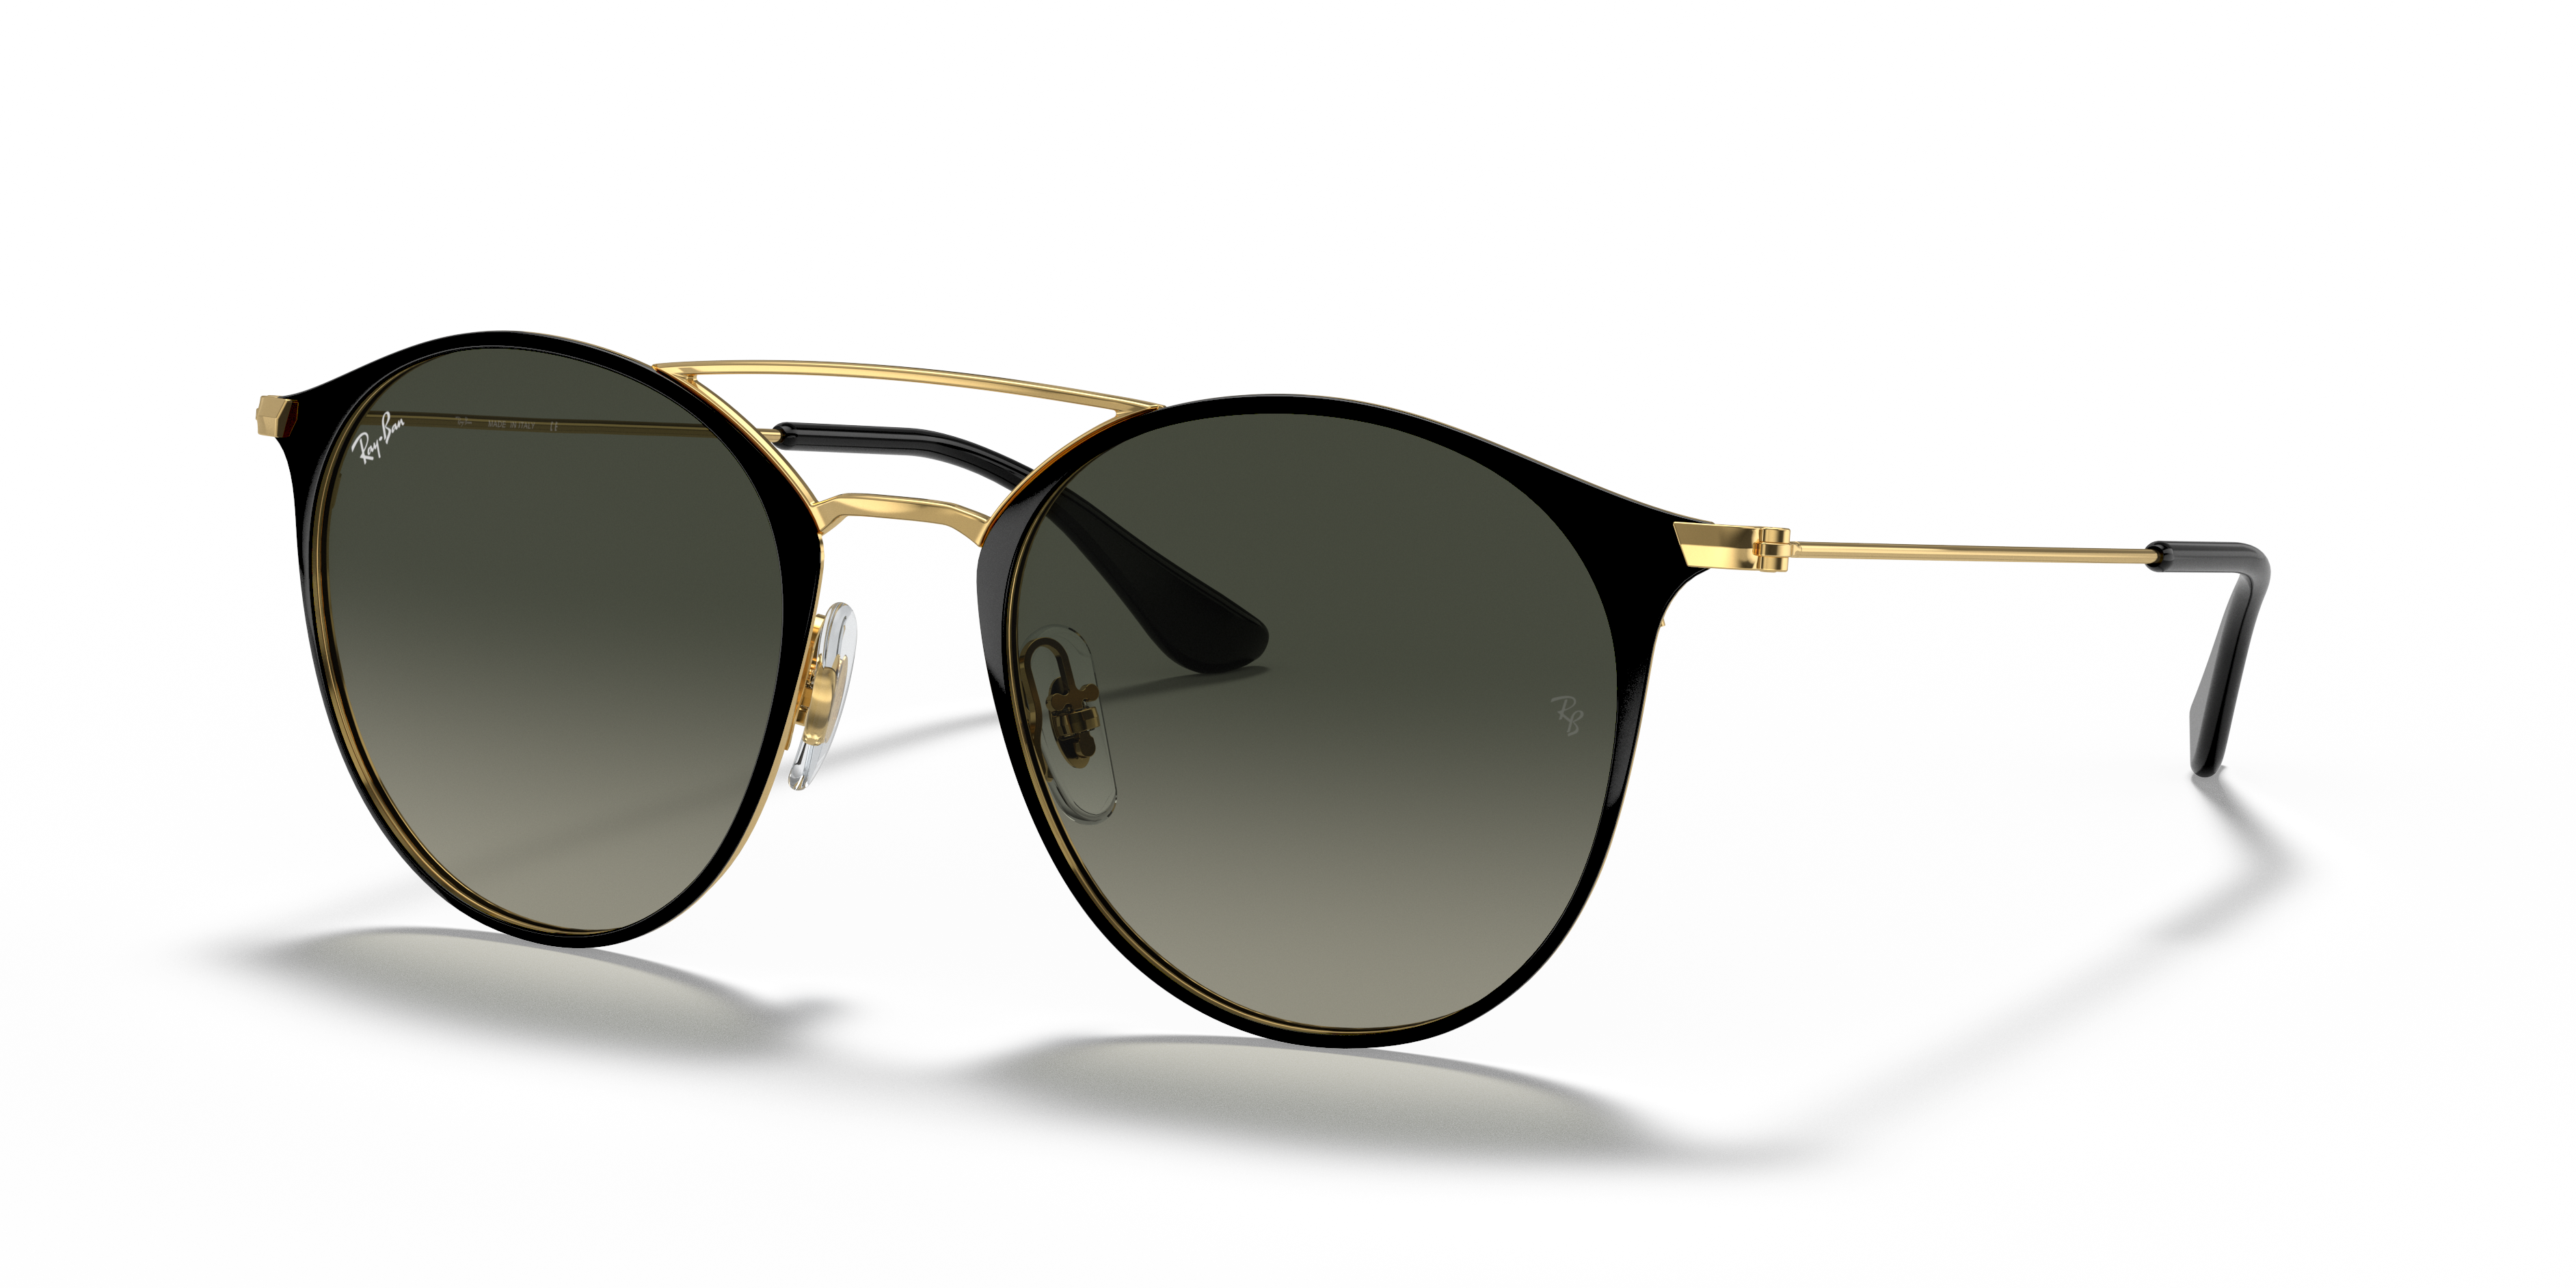 RB3546 Sunglasses in Black On Gold and Grey - RB3546 | Ray-Ban® CA